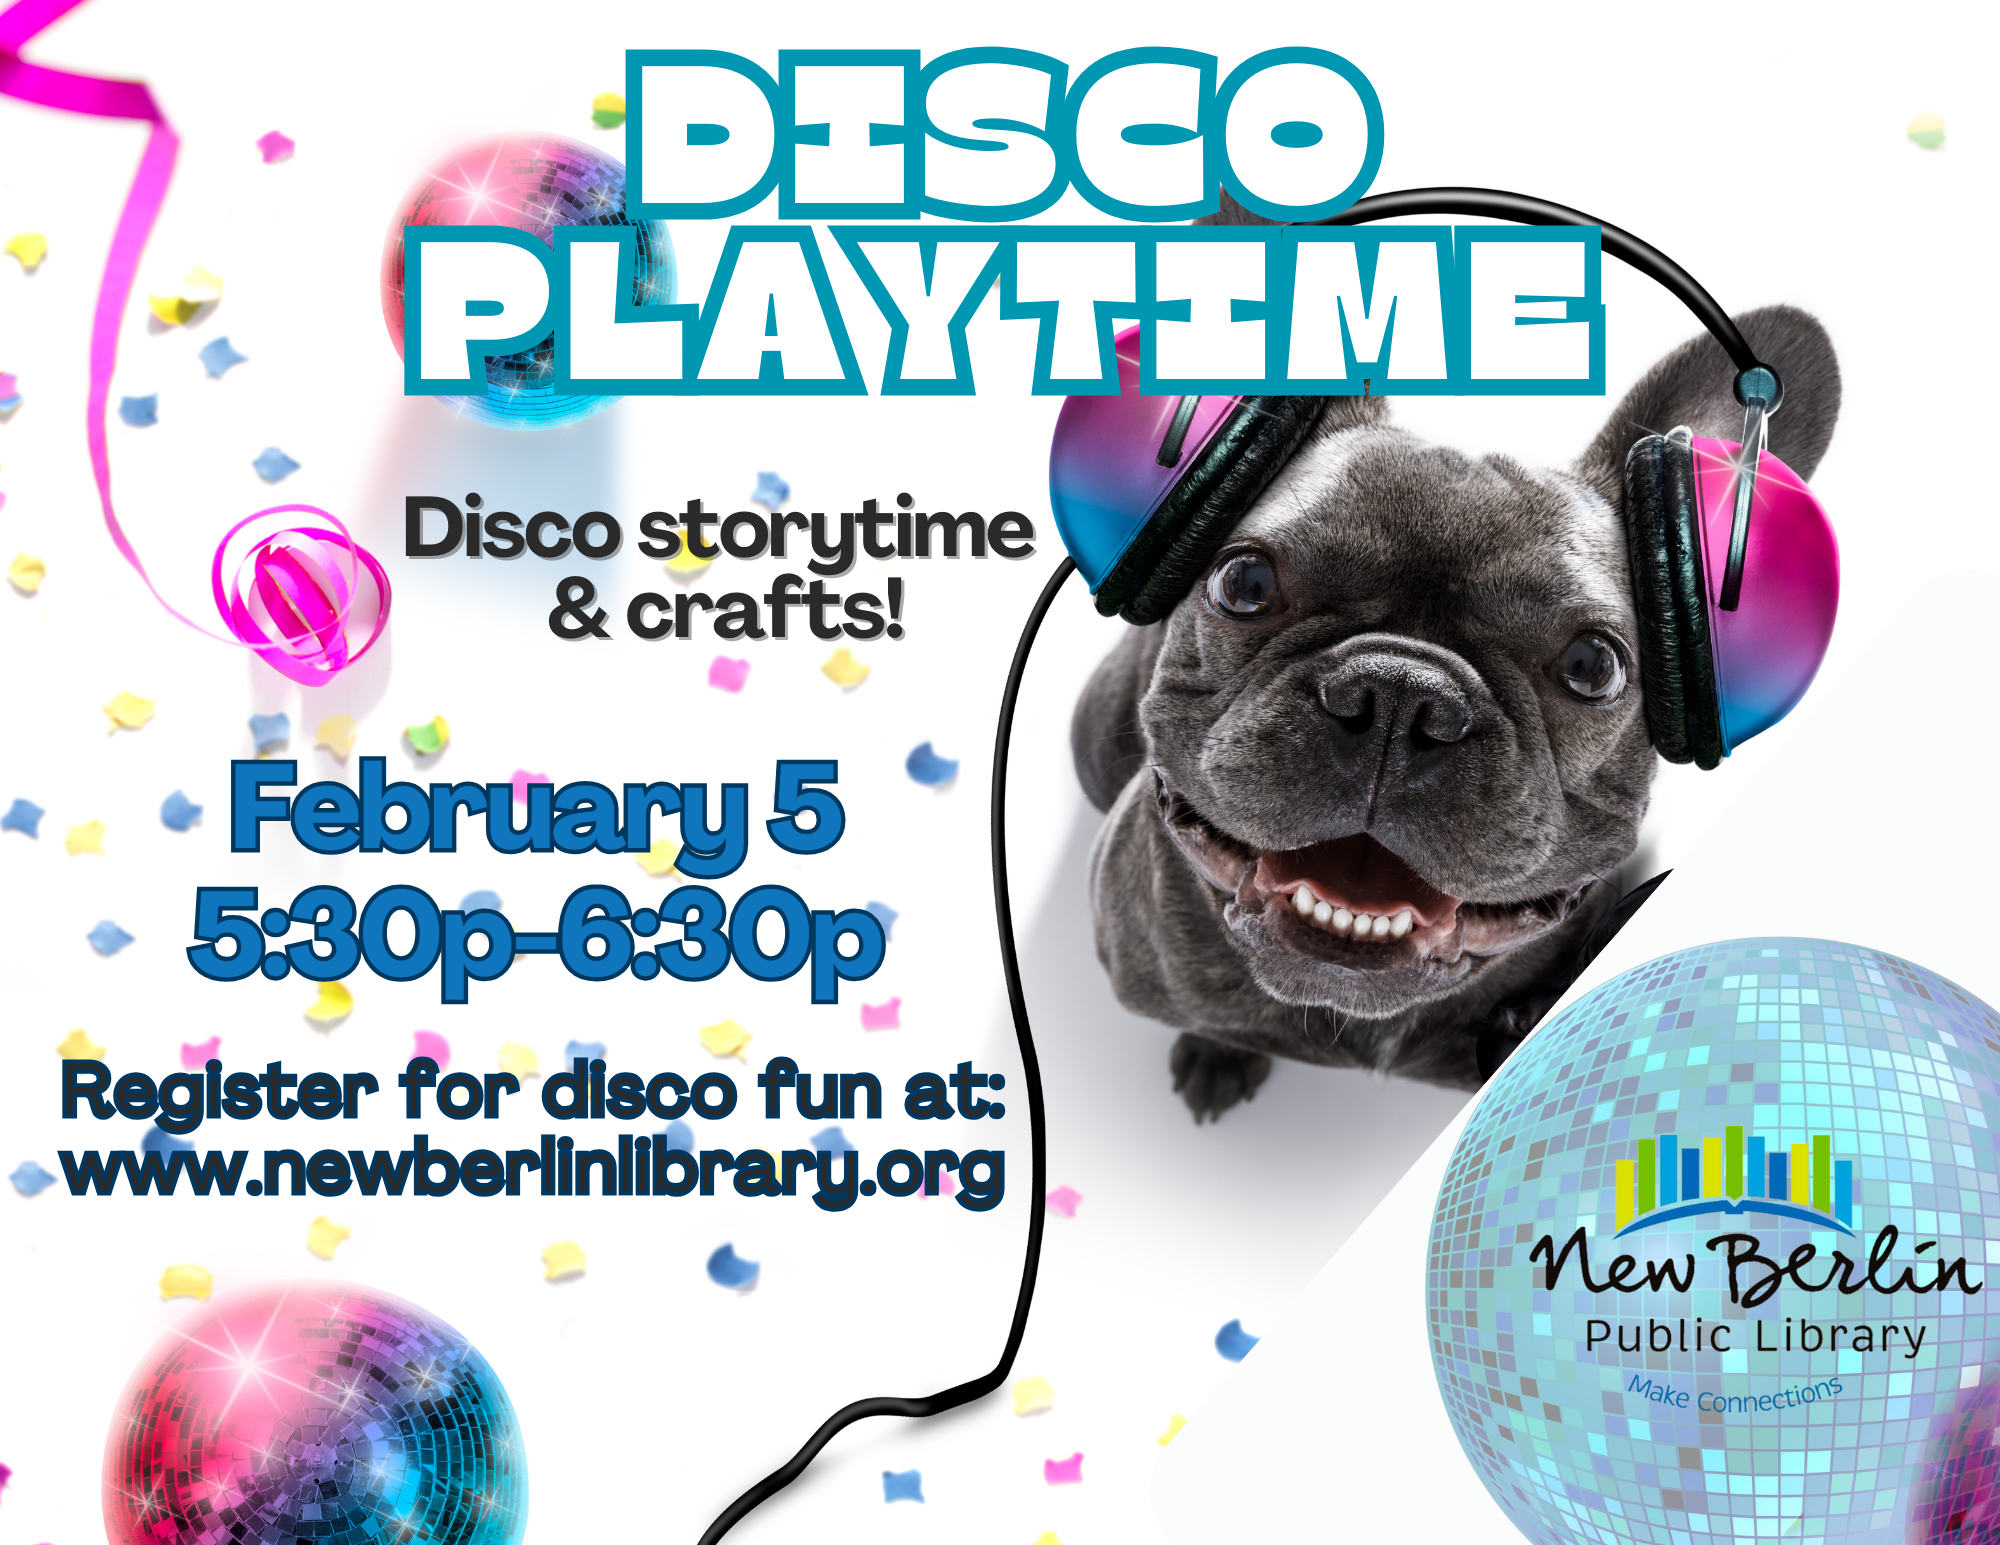 Dog surrounded by disco balls with text "Disco Playtime, Disco Storytime and crafts, February  5, 5:30-6:30pm.